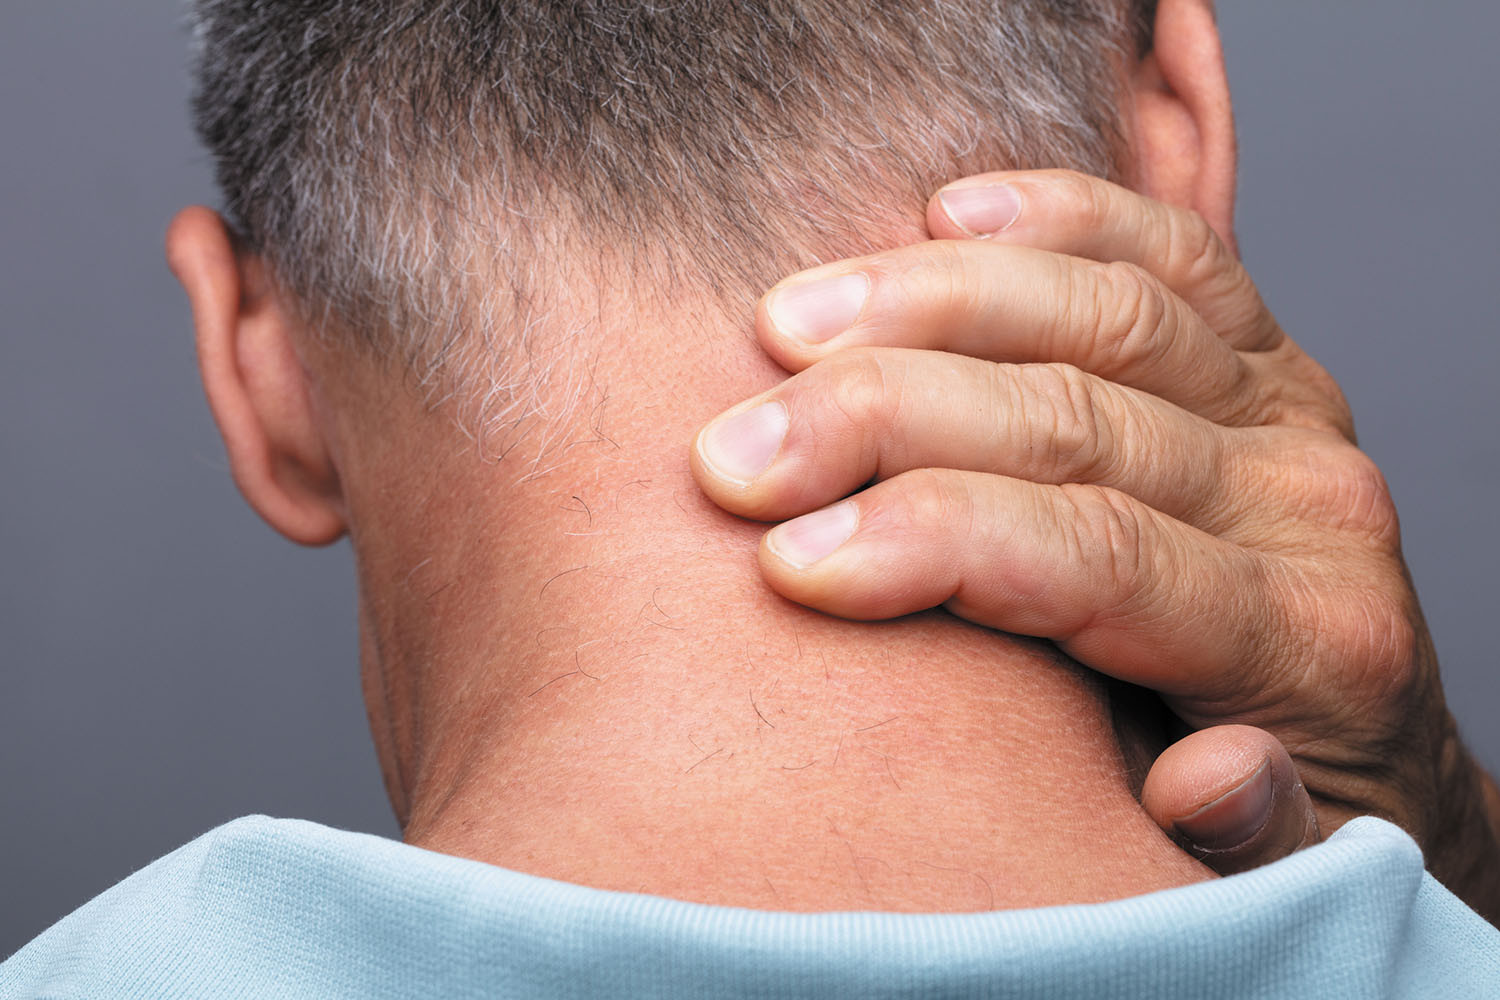 What could cause my persistent neck pain? - Harvard Health